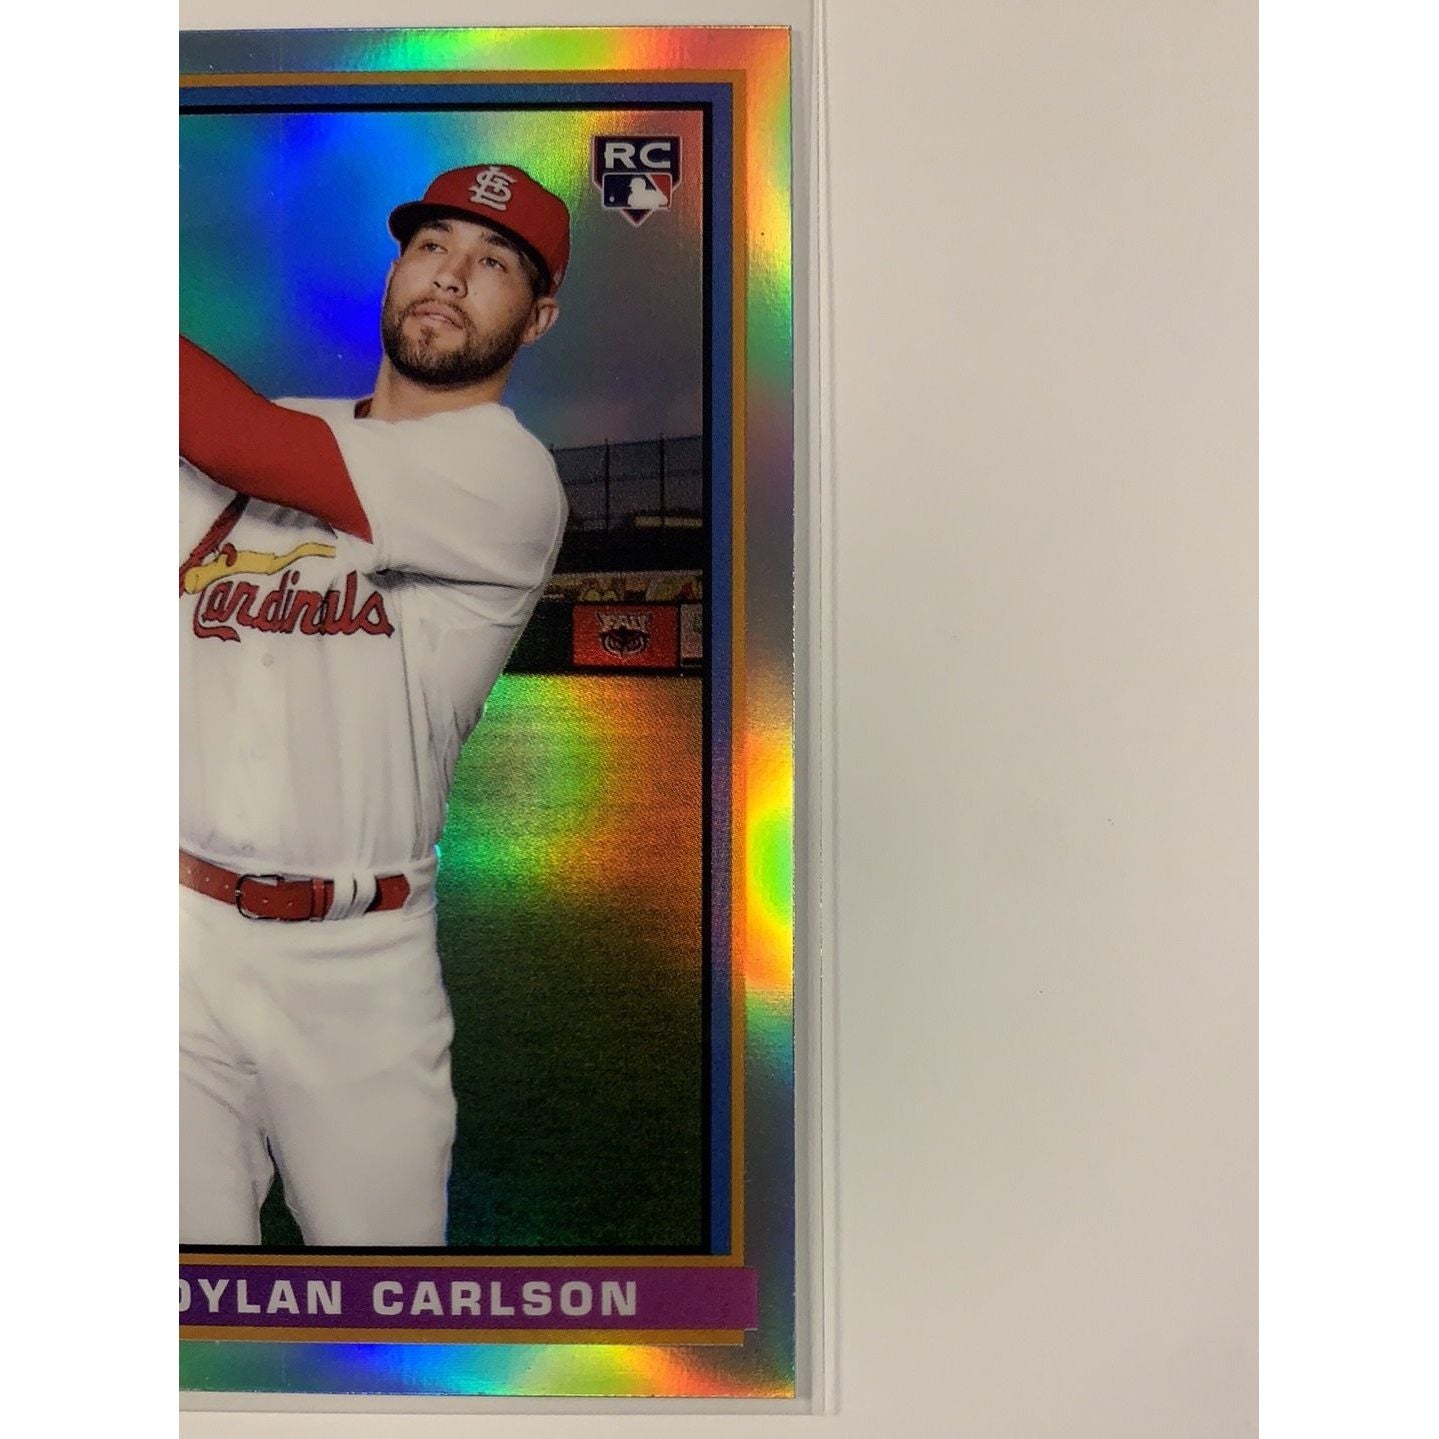  2021 Bowman Chrome Dylan Carlson 91’ RC Refractor  Local Legends Cards & Collectibles